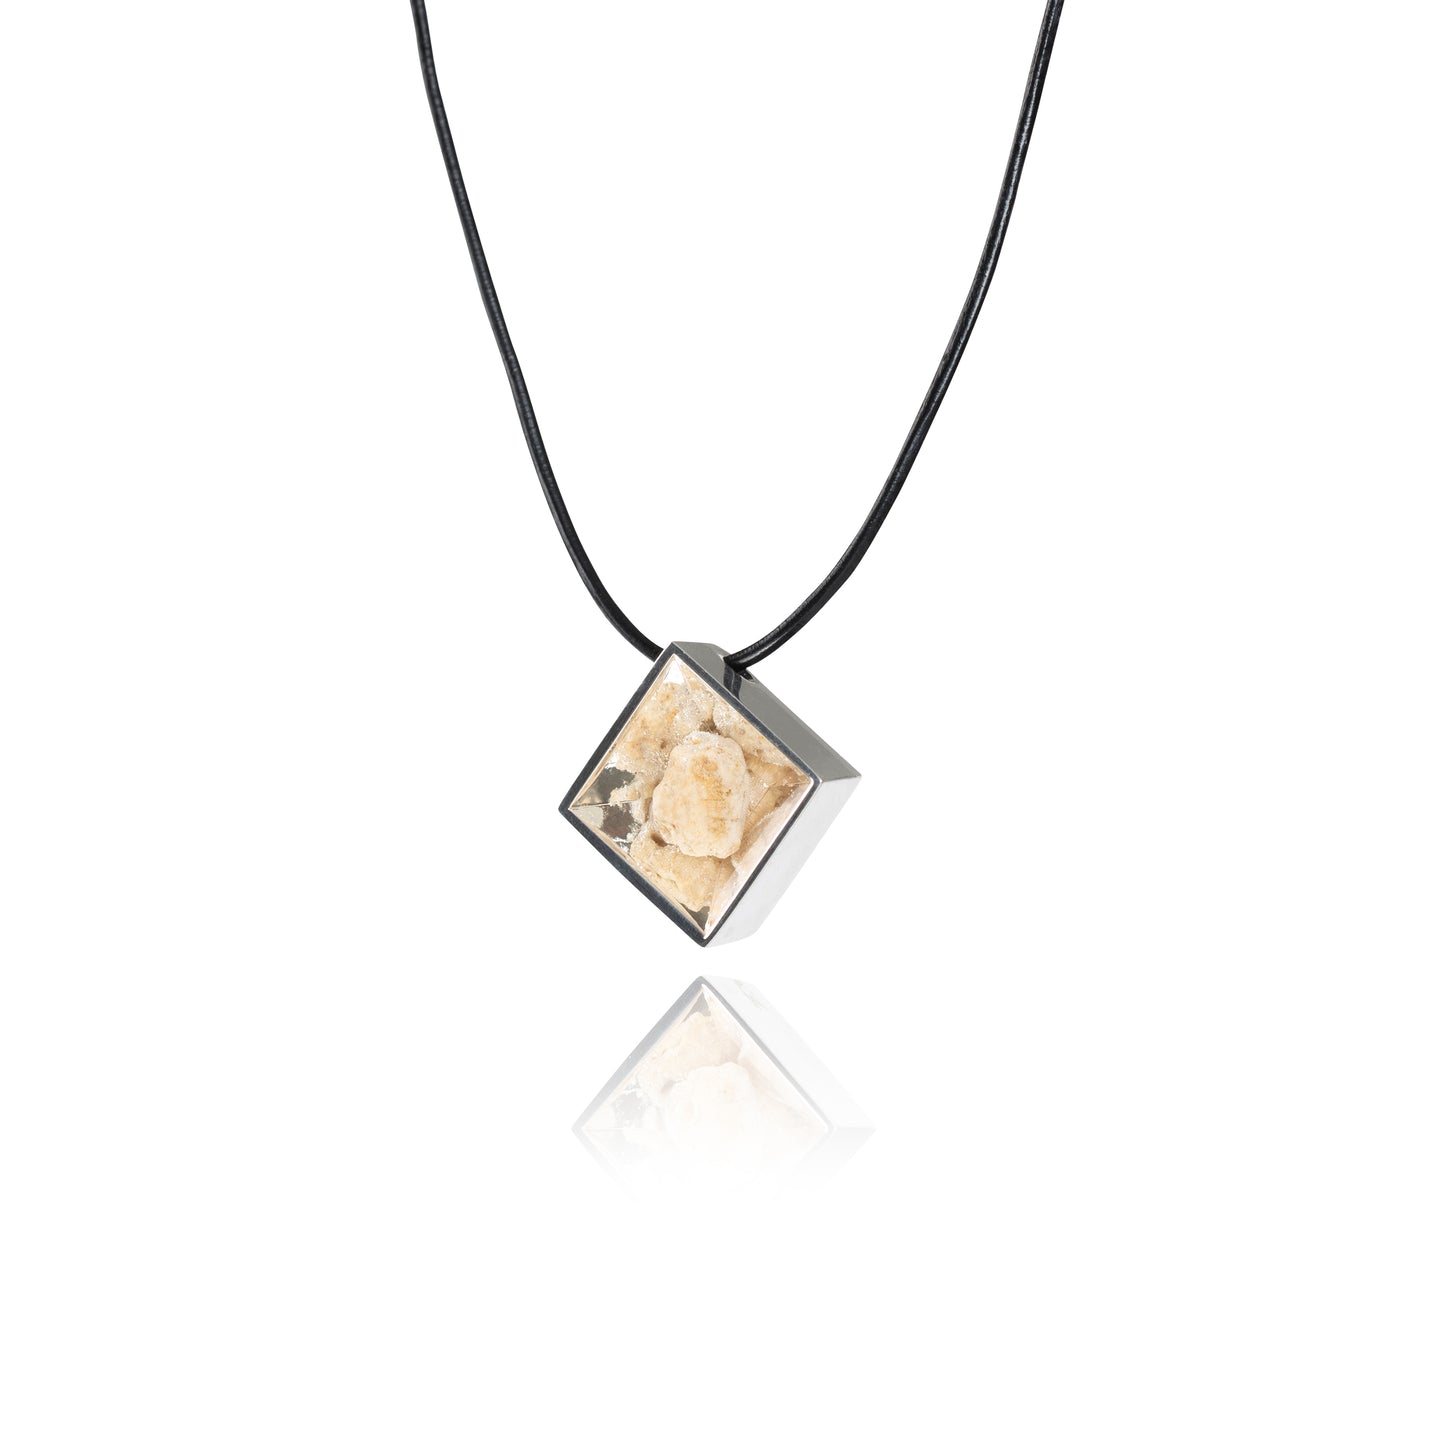 A side view of a small natural tan stone sitting in the middle of a diamond shaped metal pendant in a silver color. The pendant is hanging on a black leather necklace.